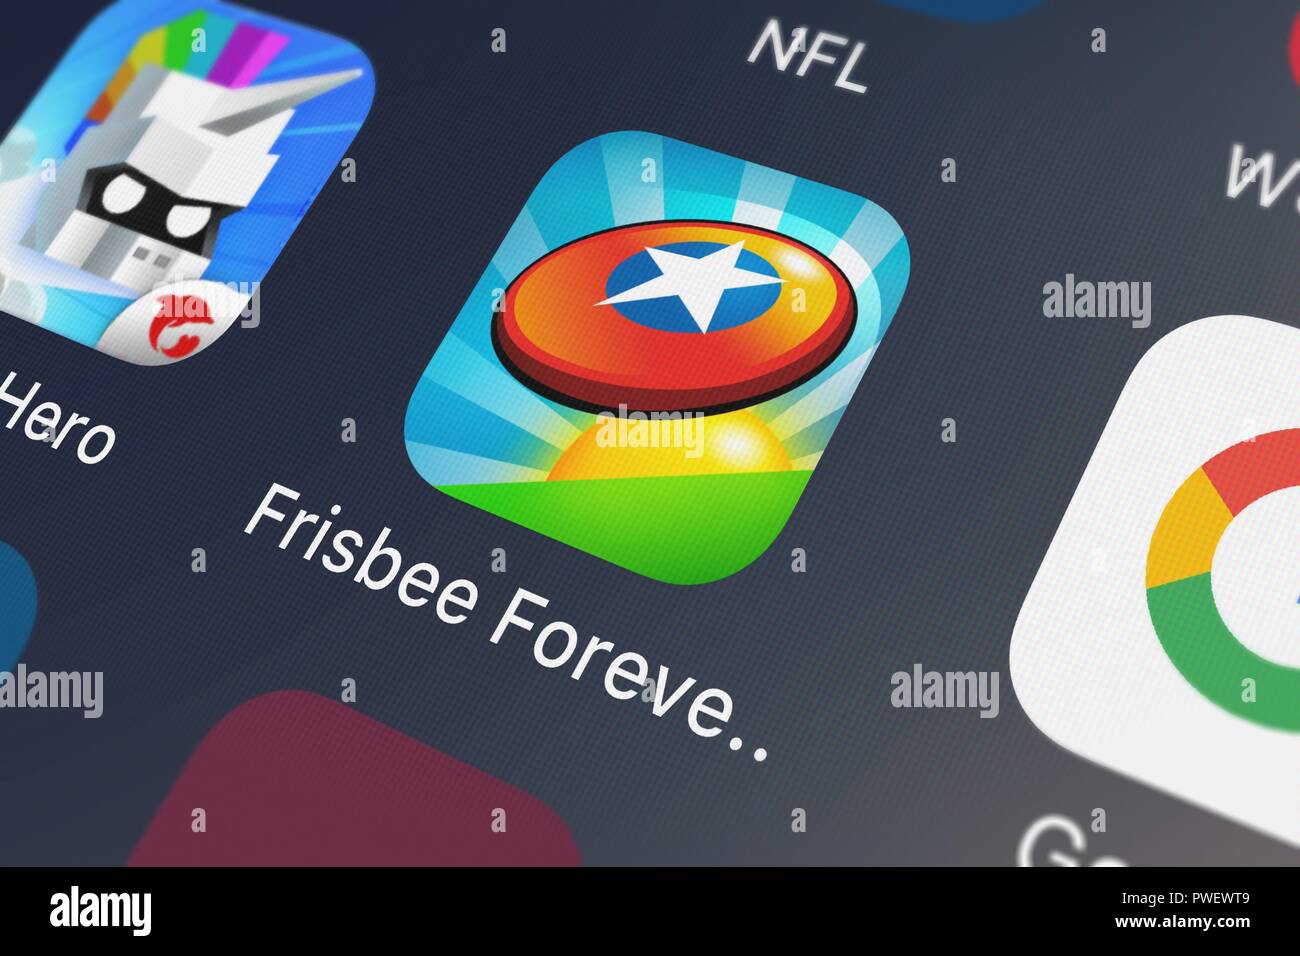 London, United Kingdom - October 15, 2018: Screenshot of the Frisbee® Forever mobile app from Kiloo icon on an iPhone. Stock Photo